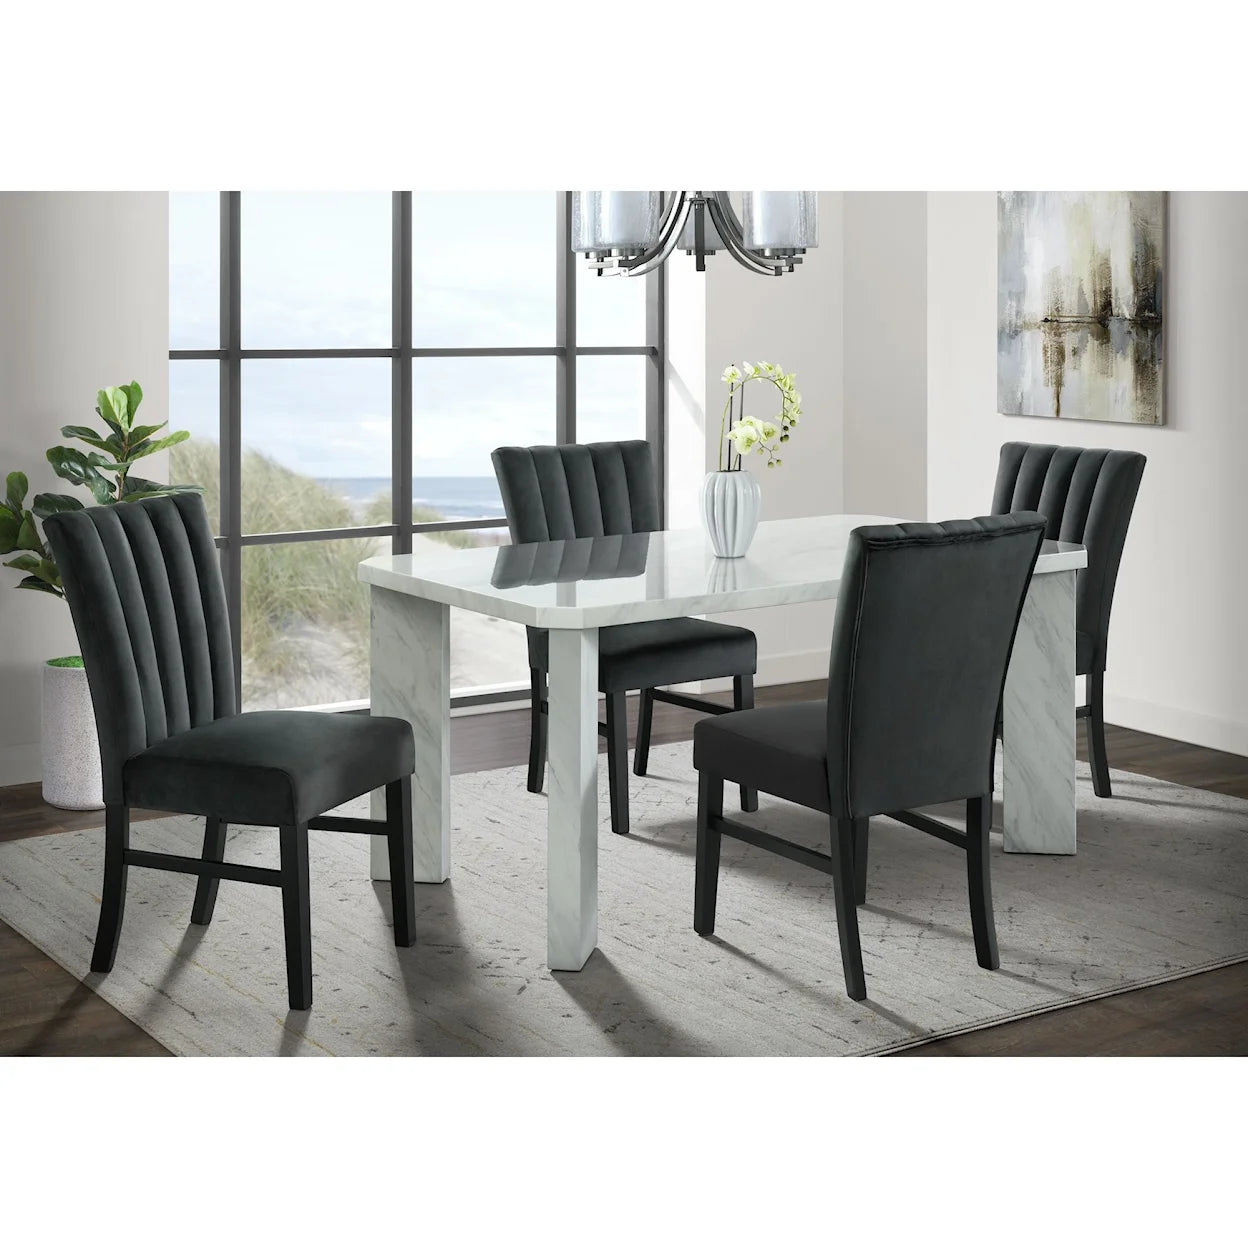 Bellini Rectangle Dining Table and 4 Bellini Chairs- MULTIPLE COLORS (Black, Grey, Navy, Green)